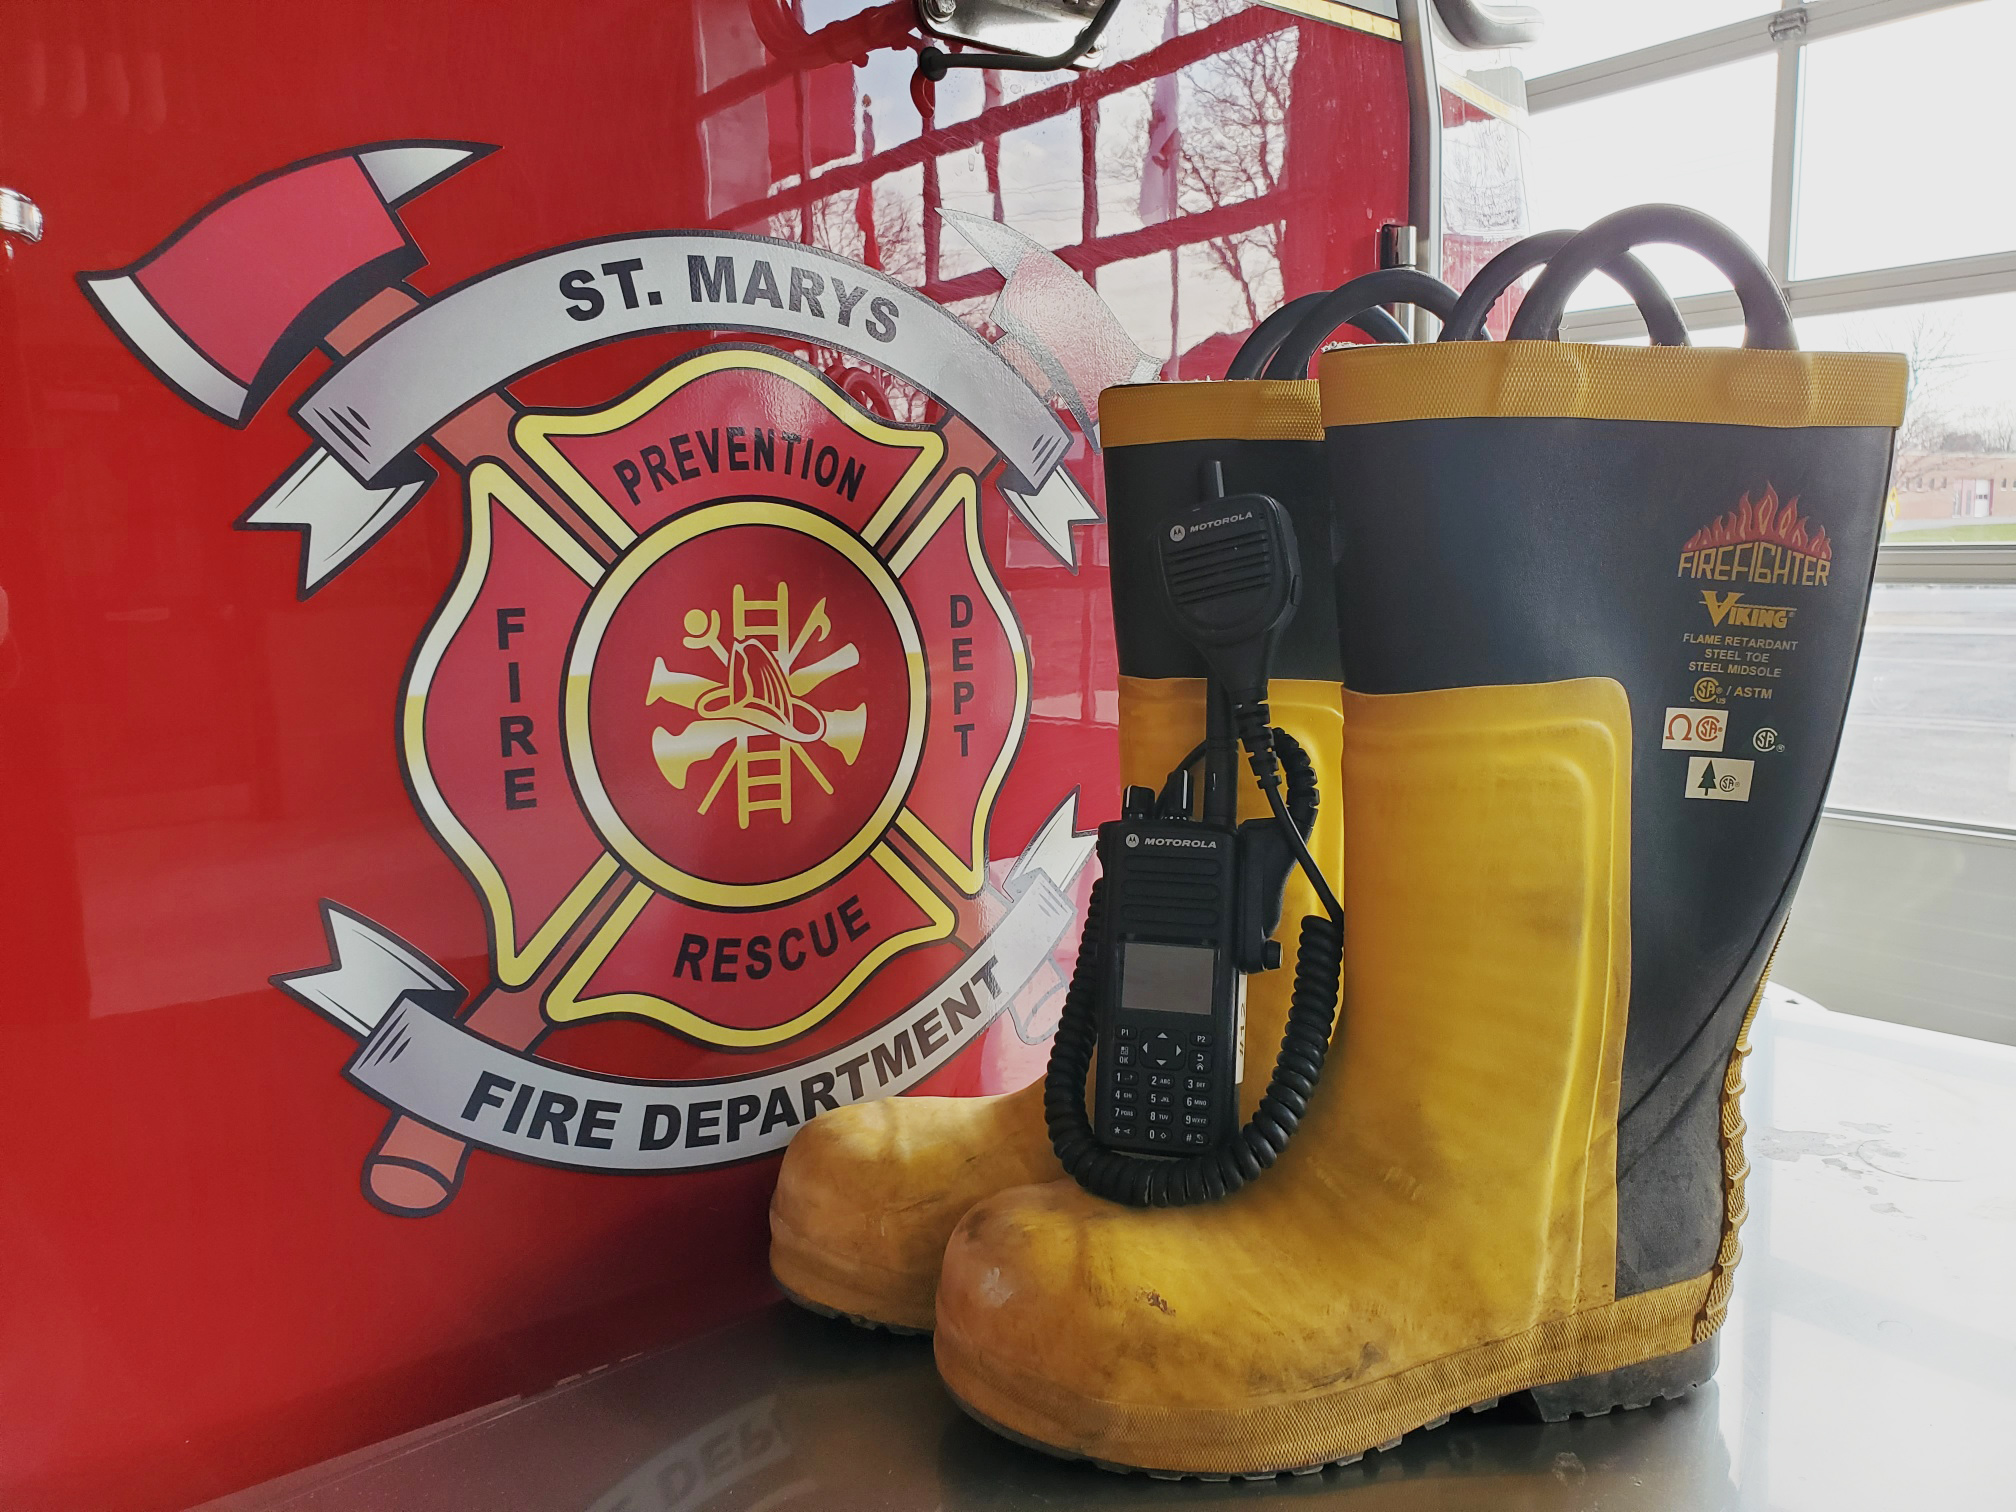 Donation will help buy new boots and communications equipment